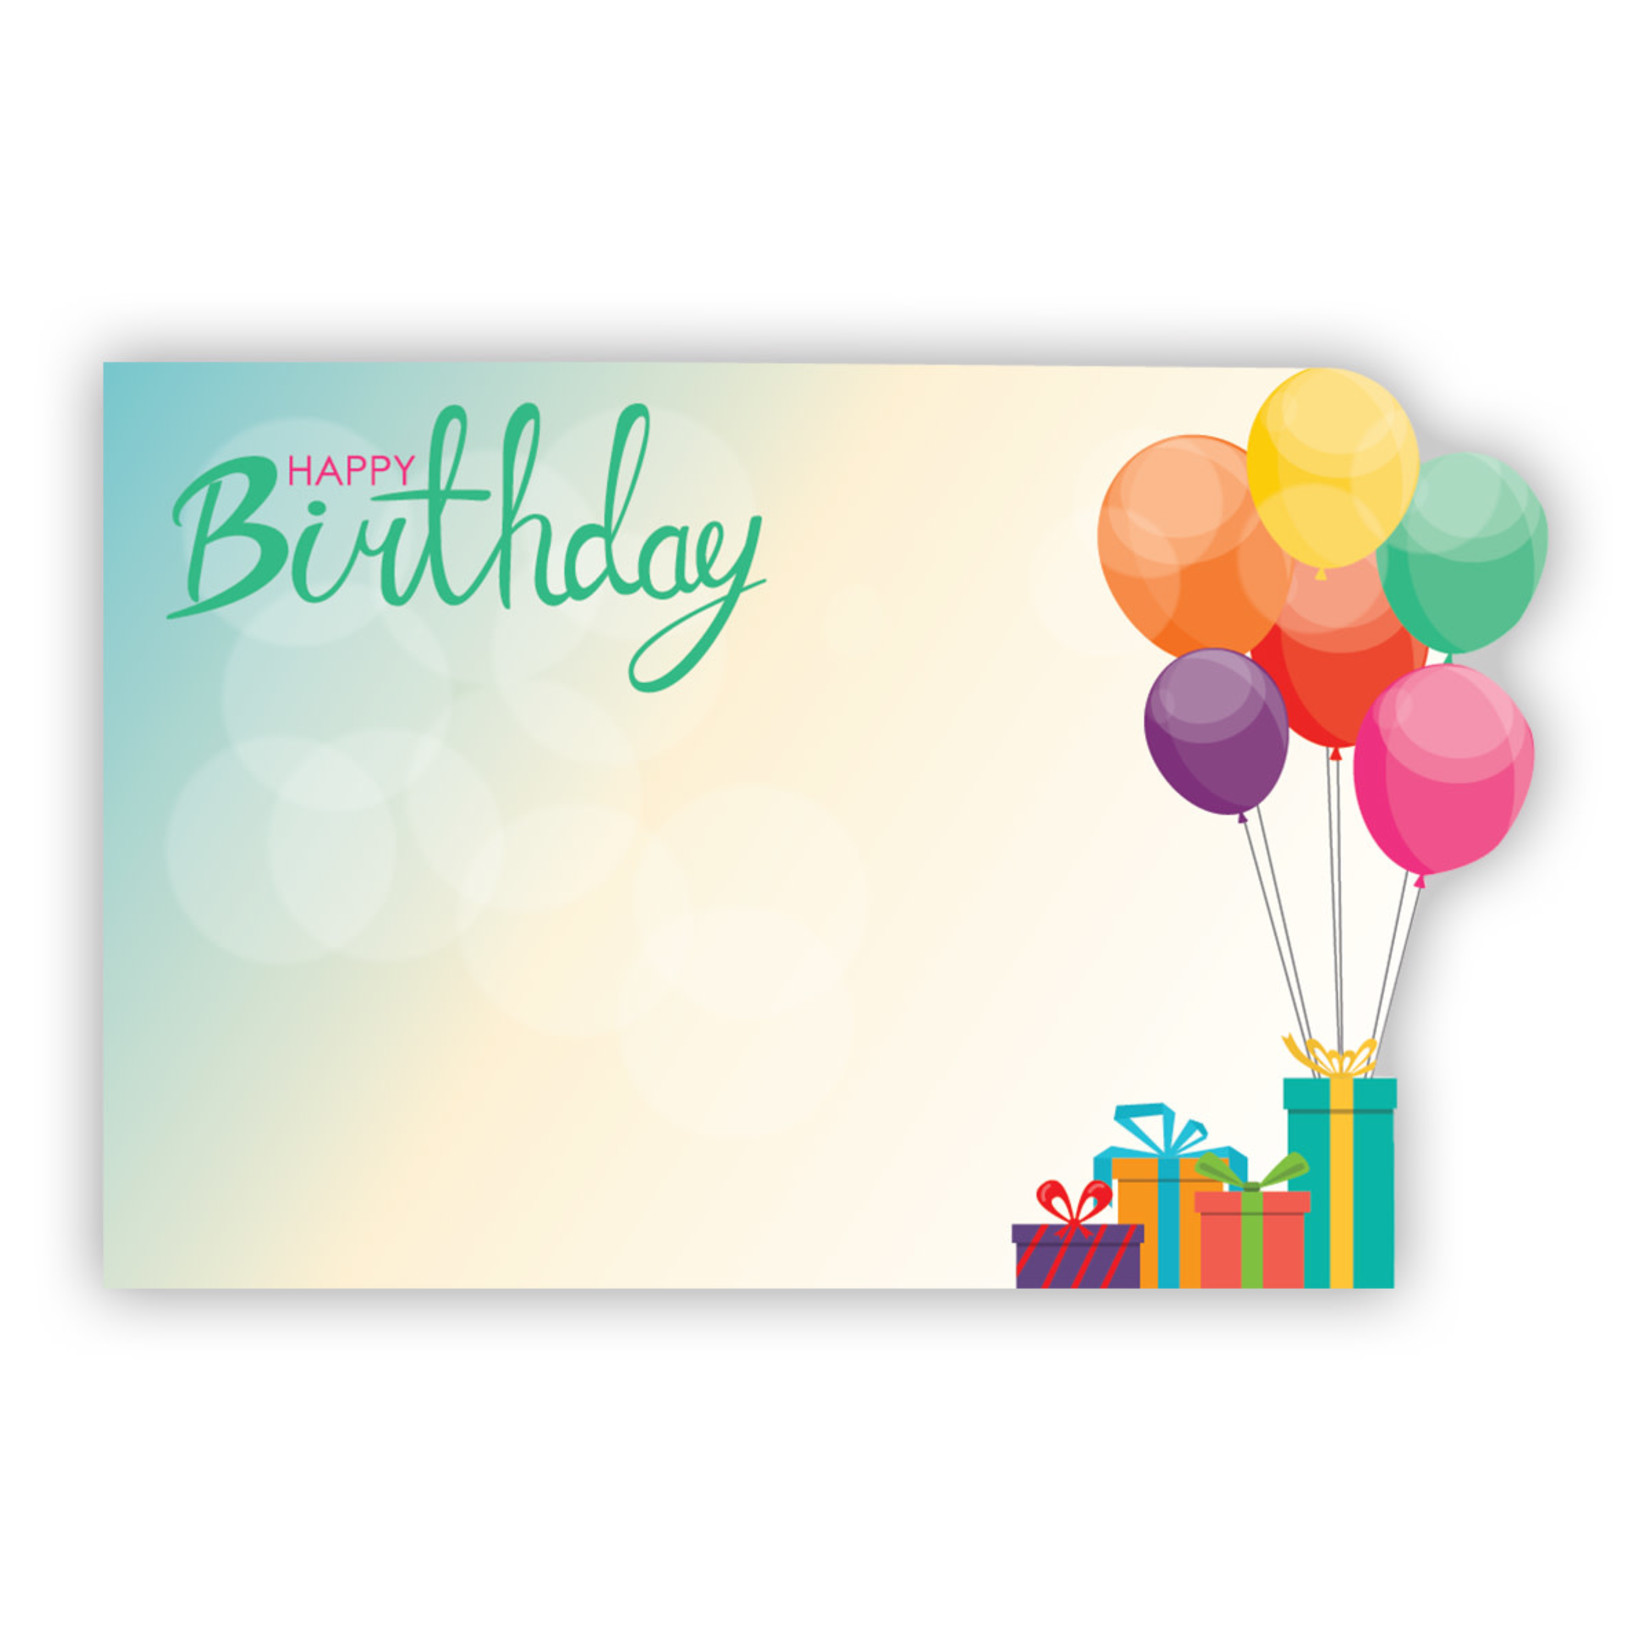 "HAPPY BIRTHDAY" Balloons & Gifts, Die Cut